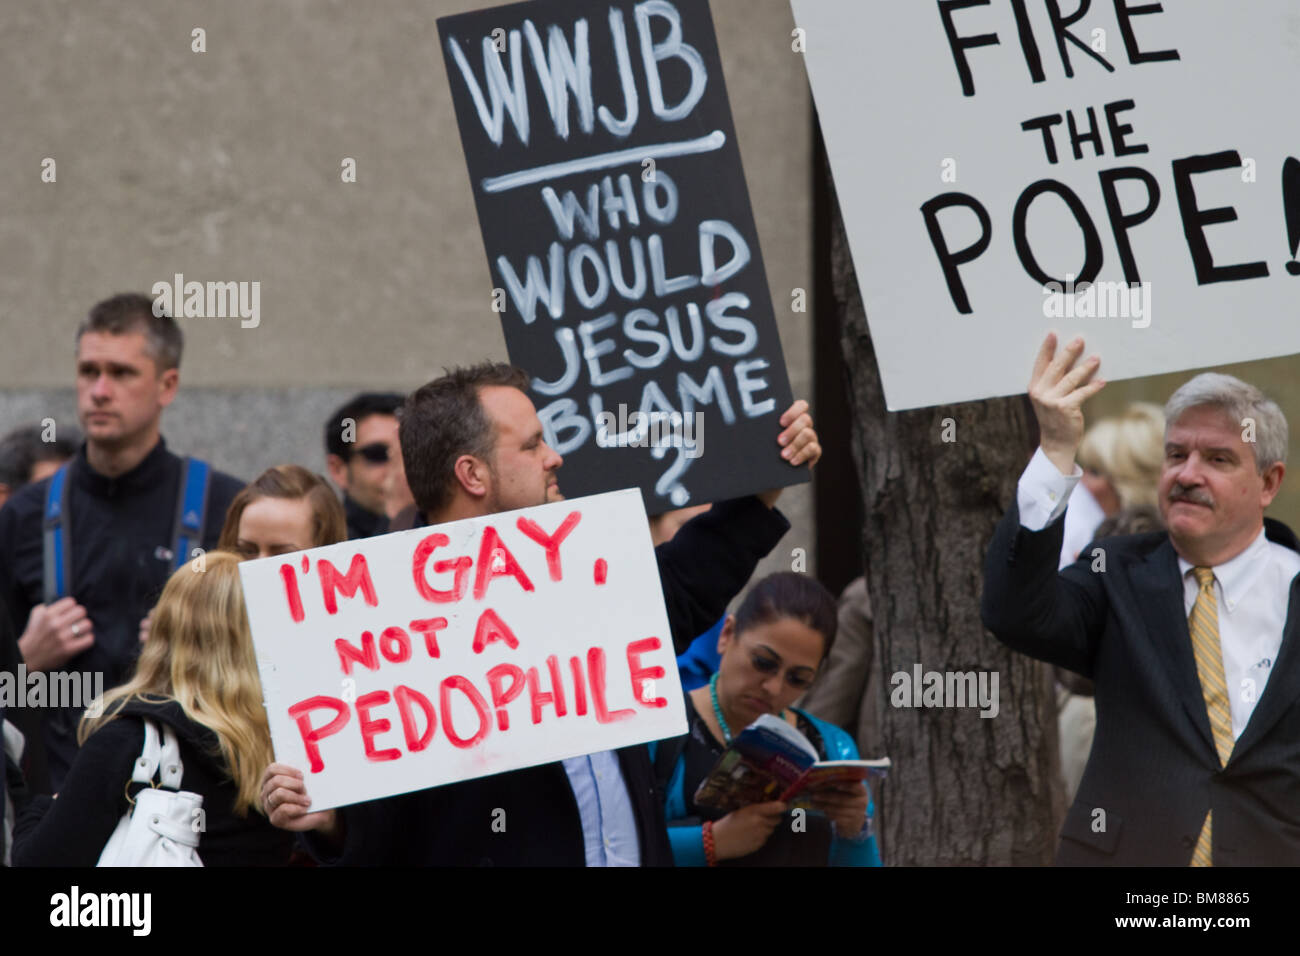 Protesters opposing the Catholic church on pedophilia opposite St. Patrick's Cathedral on Easter day 2010 Stock Photo